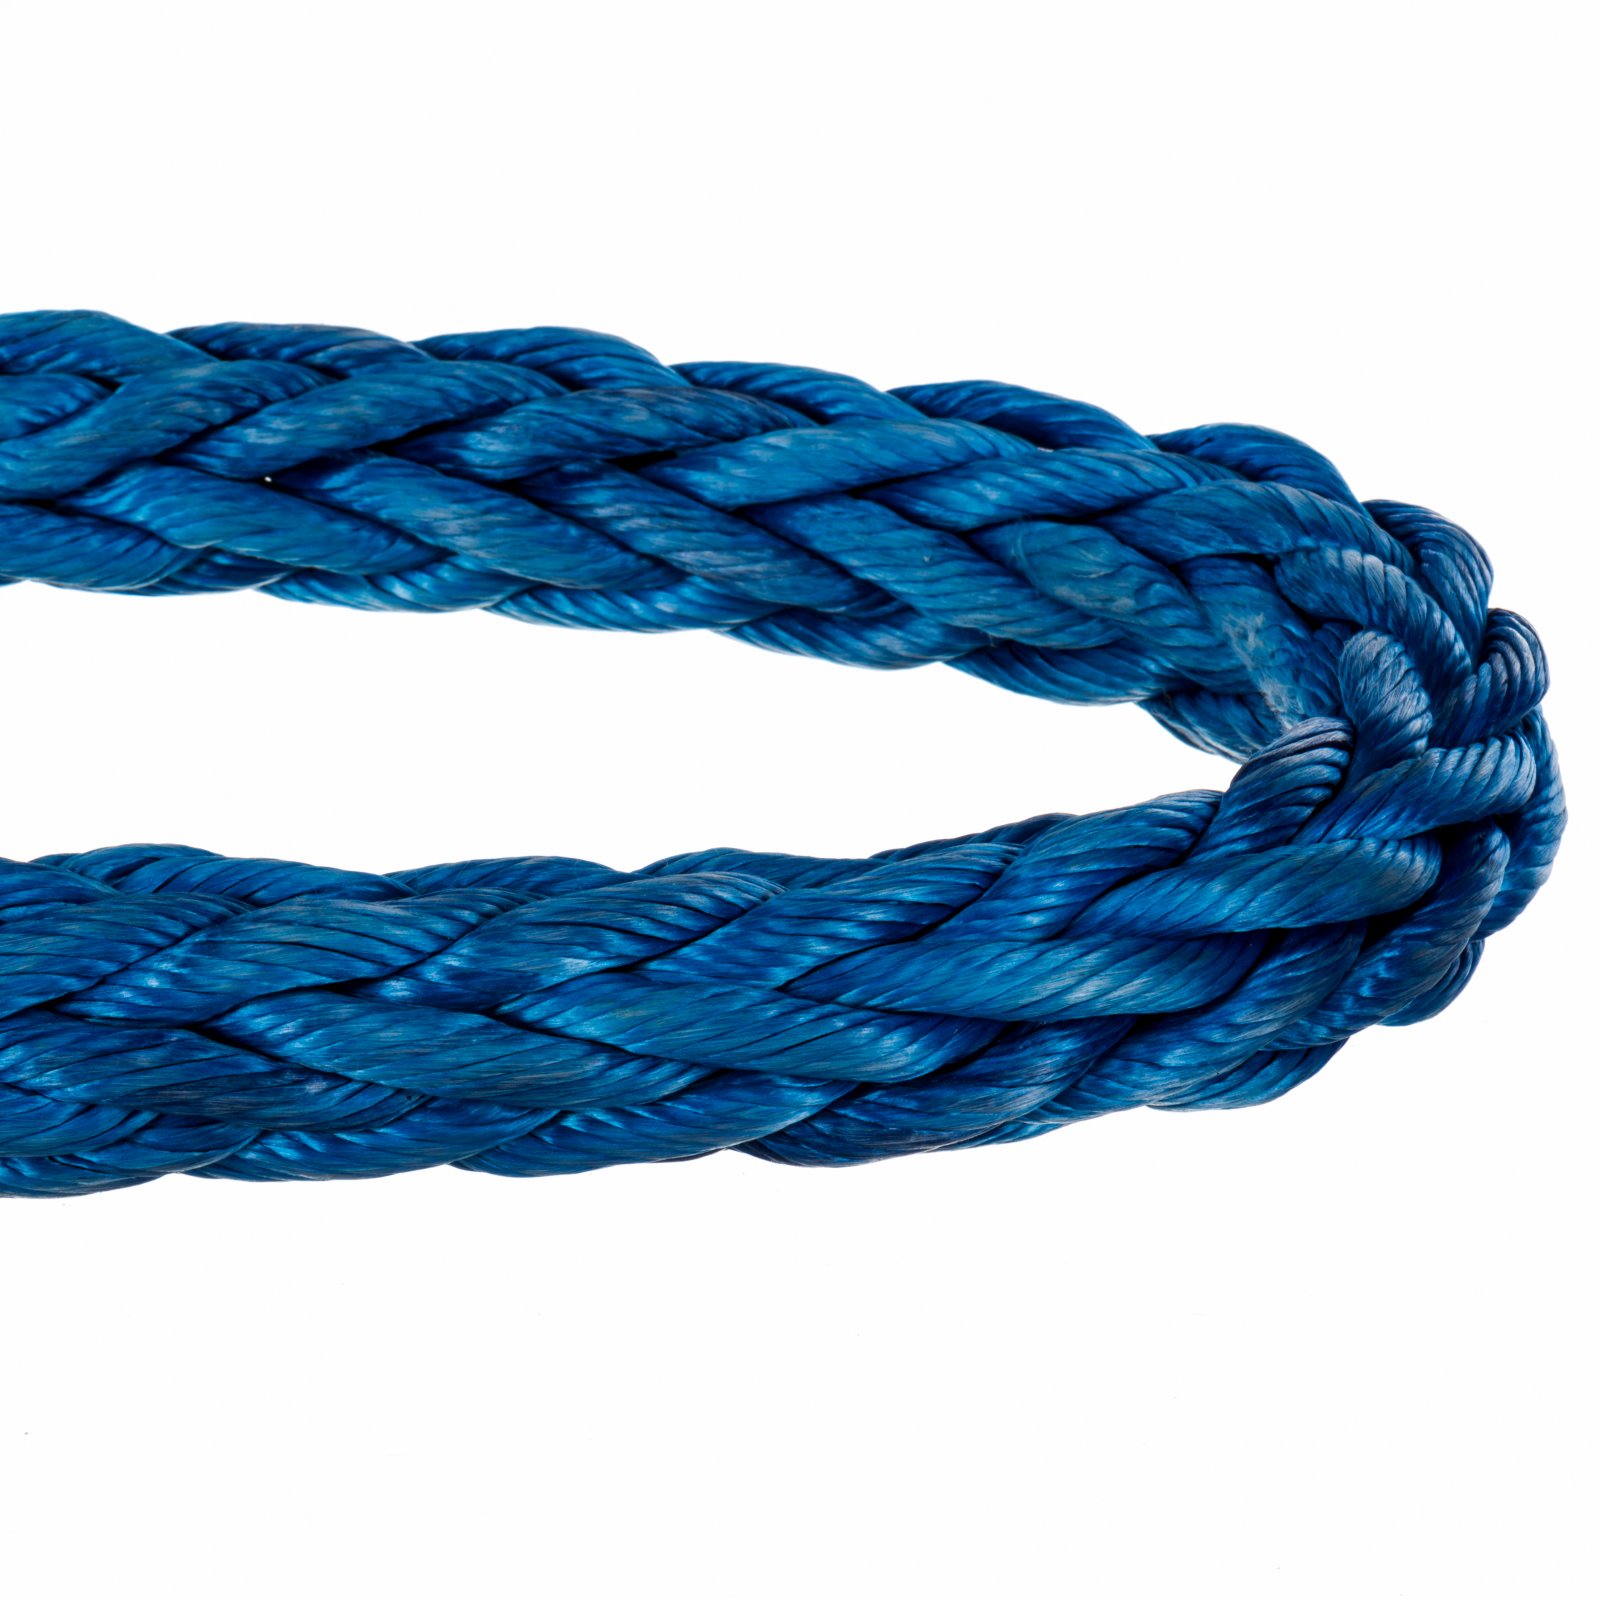 HMPE 12 Strand ropes - Lowest prices, free shipping